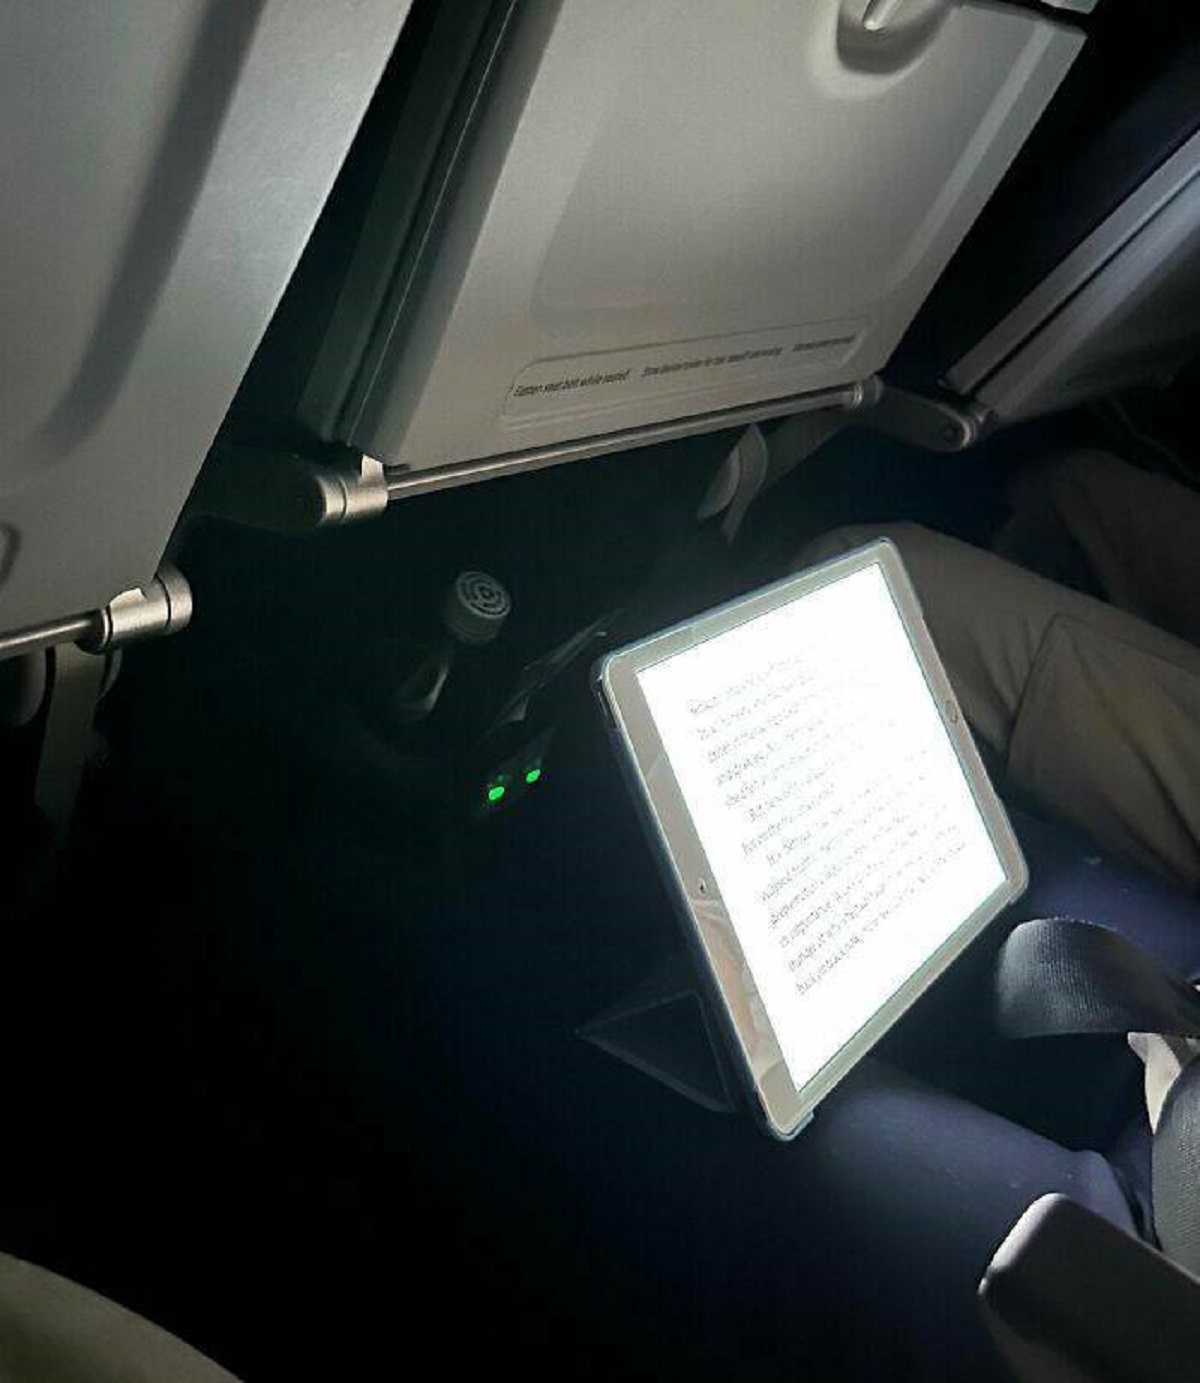 "This Person Reading On Their iPad With The Brightness All The Way Up On A 6-Hour Red-Eye Flight"